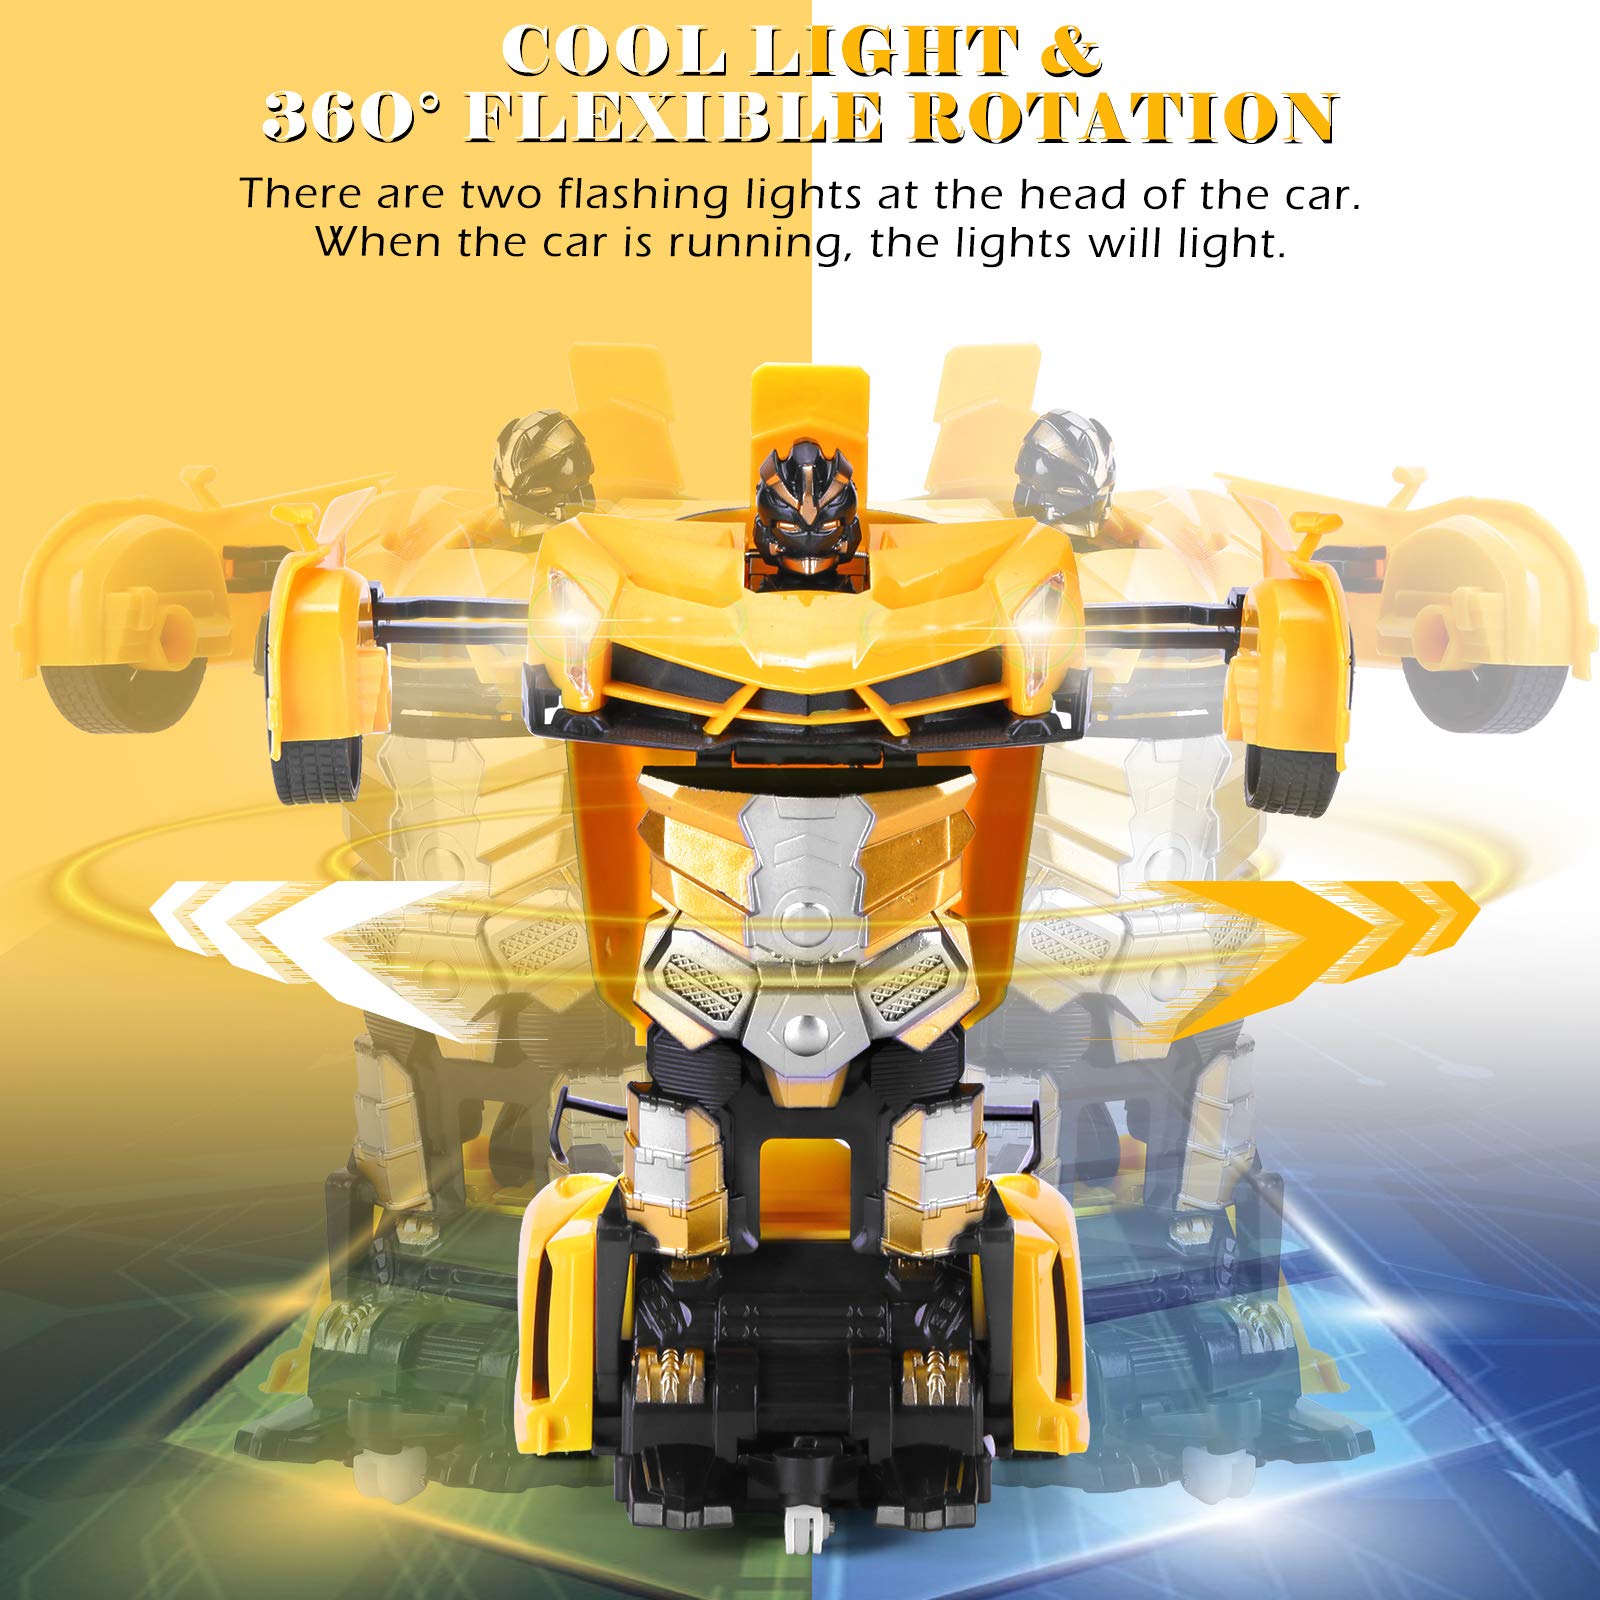 Dolanus Remote Control Car - Transform Robot RC Cars Contains All Batteries: One-Button Deformation and 360 Degree Rotating Drifting, Present Christmas Birthday Gift for Boys/Girls